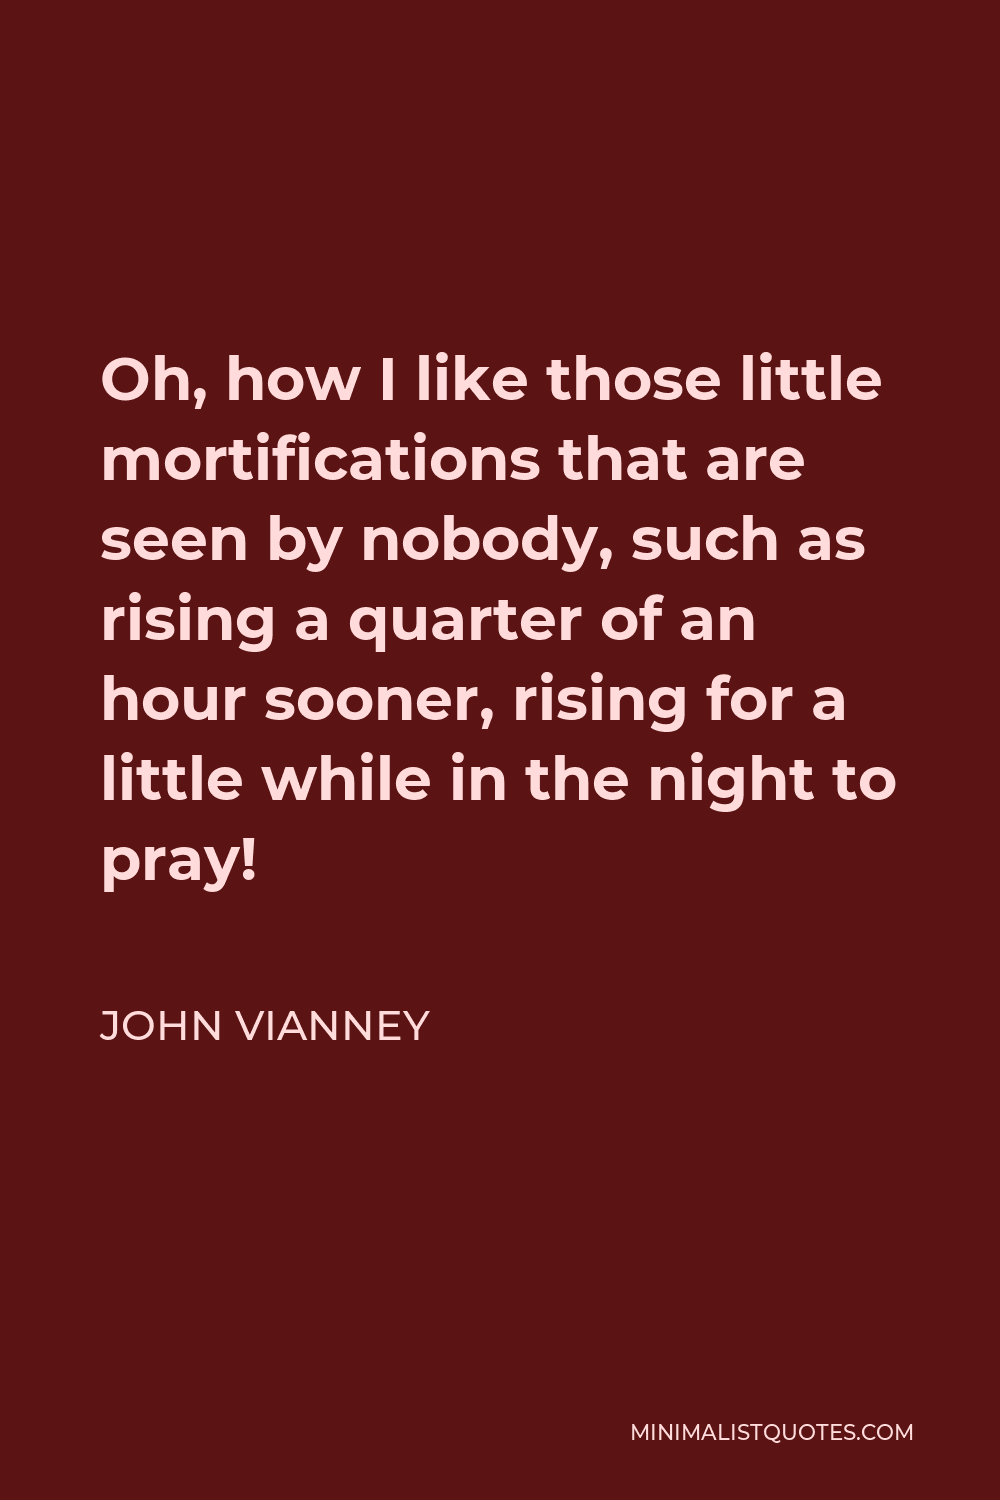 John Vianney Quote - Oh, how I like those little mortifications that are seen by nobody, such as rising a quarter of an hour sooner, rising for a little while in the night to pray!